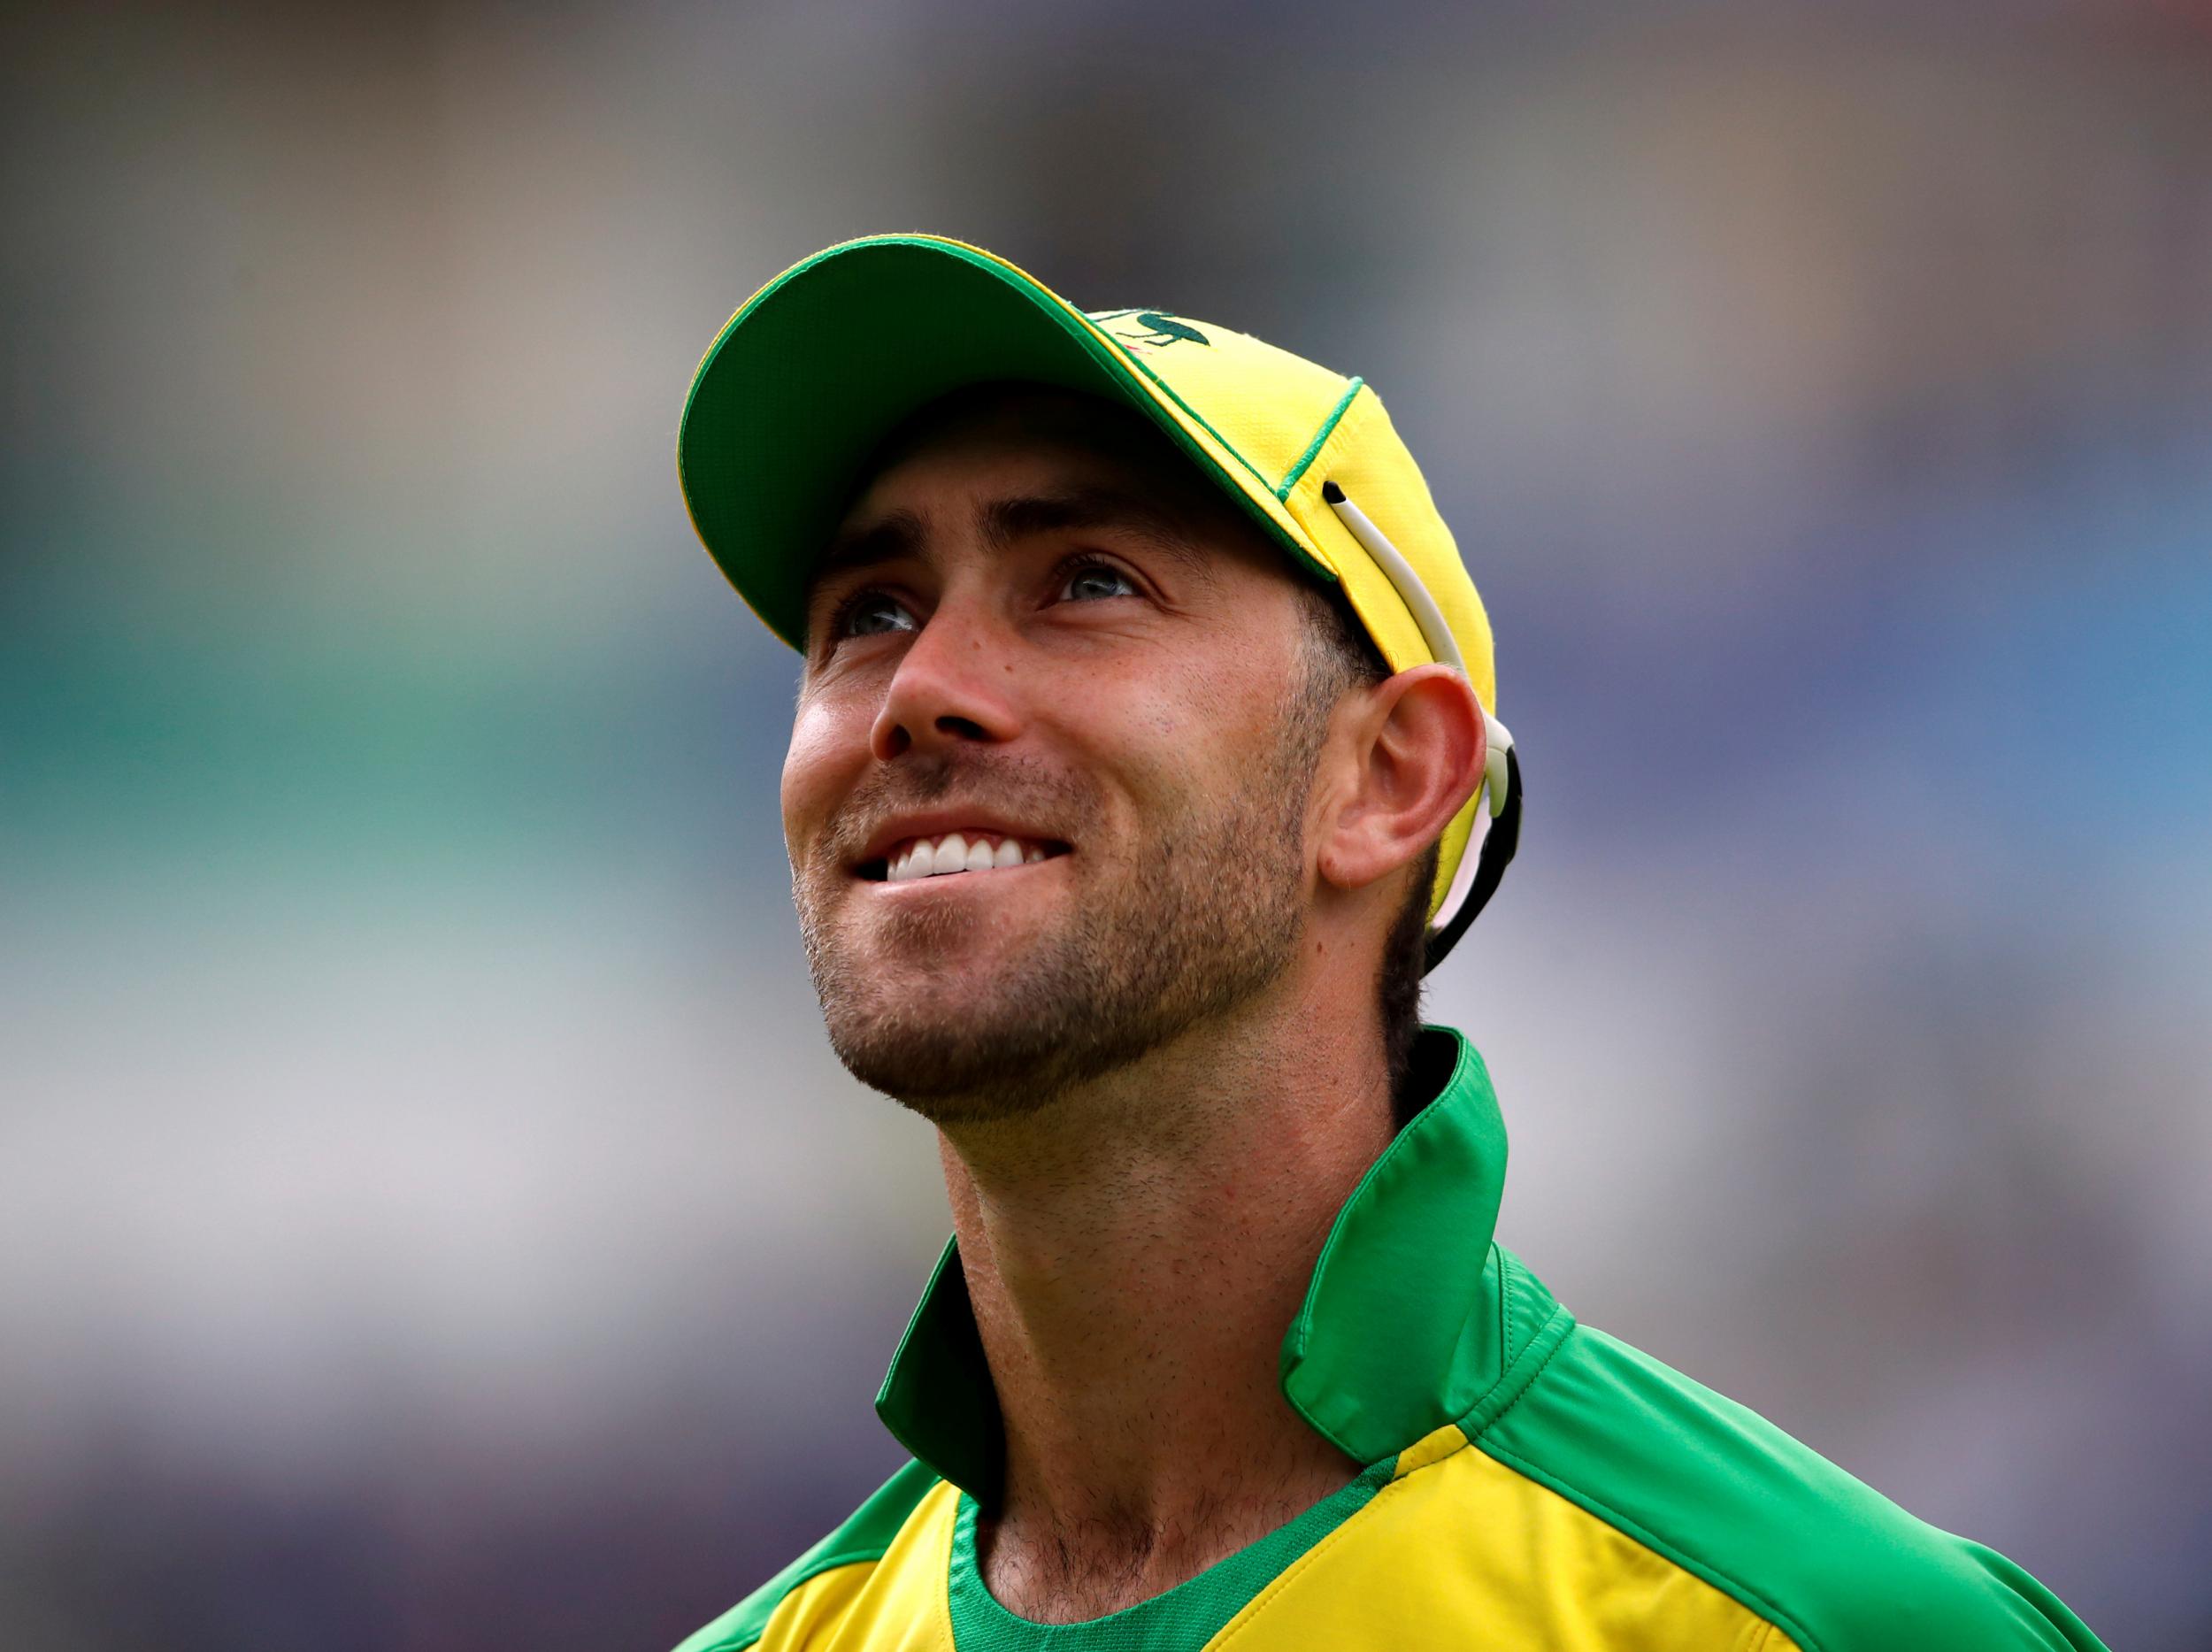 Glenn Maxwell starred at the Cricket World Cup